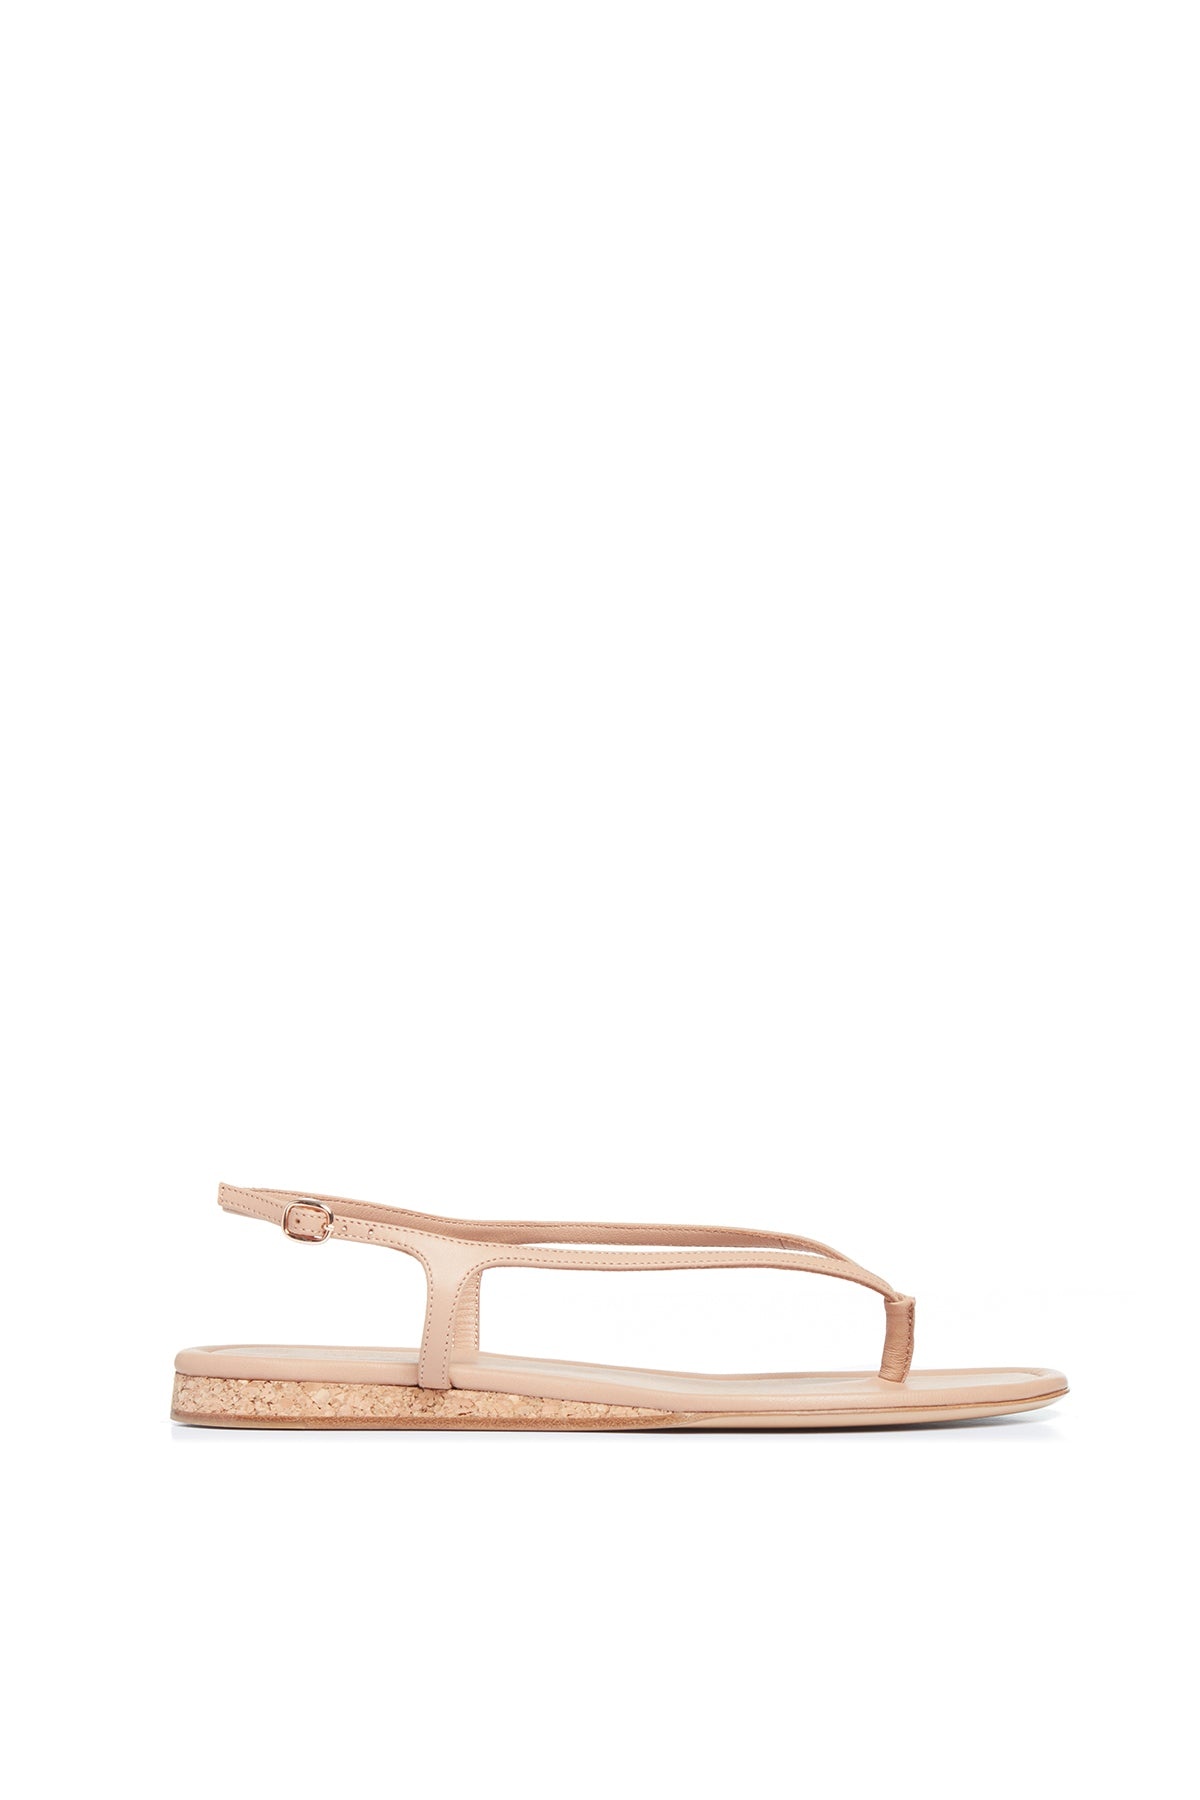 Gia Sandals in Dark Camel Leather - 1